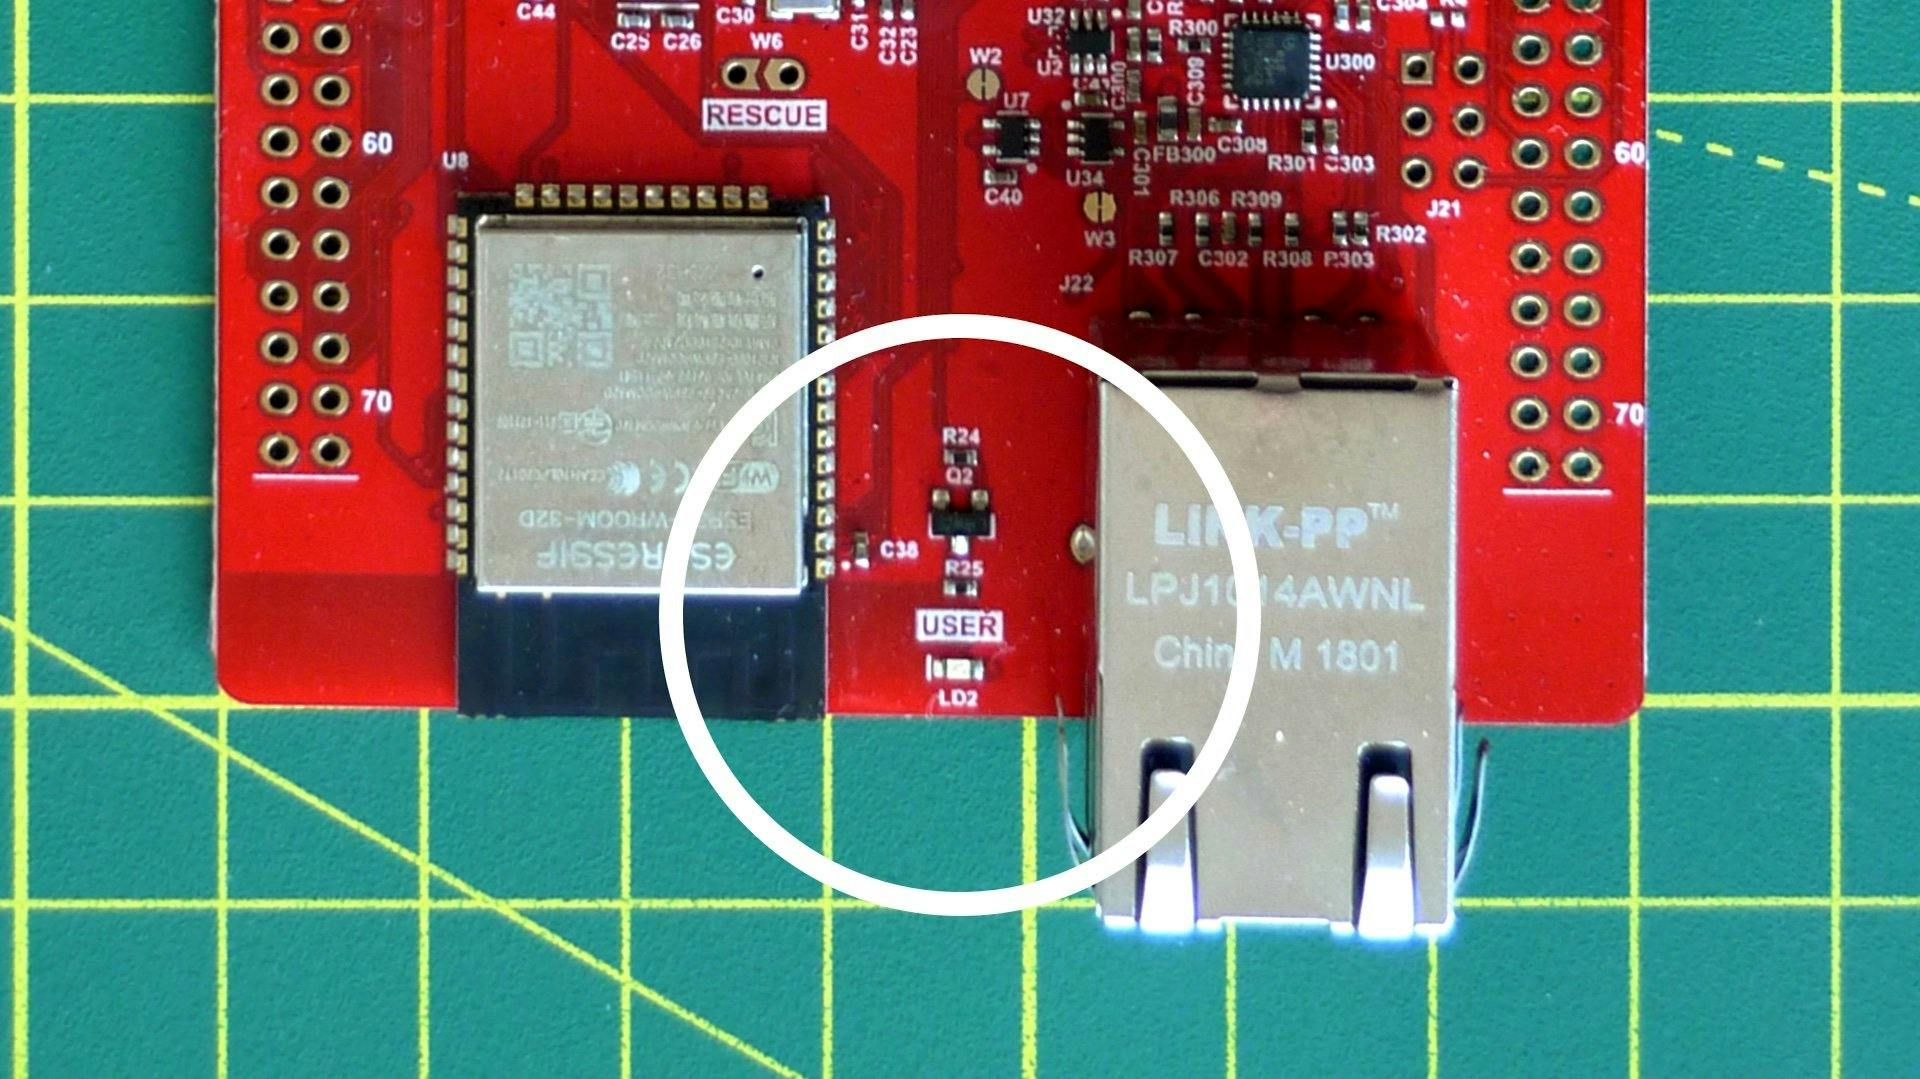 The board's user-controllable LED.